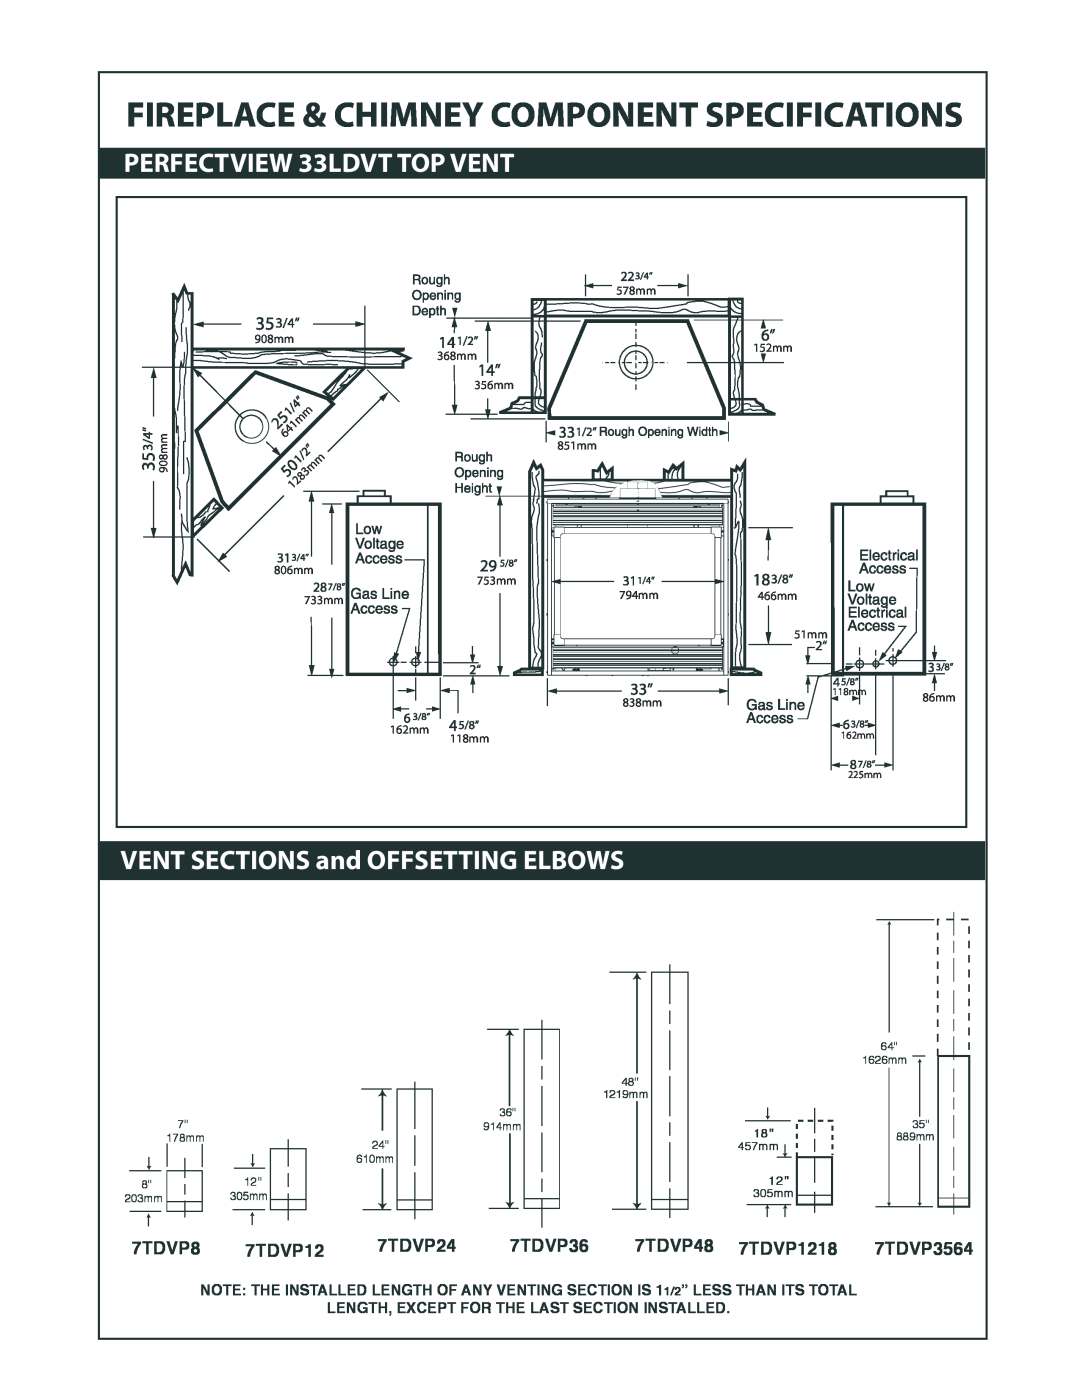 Vermont Casting specifications 7TDVP3564, Fireplace & Chimney Component Specifications, PERFECTVIEW 33LDVT TOP VENT 